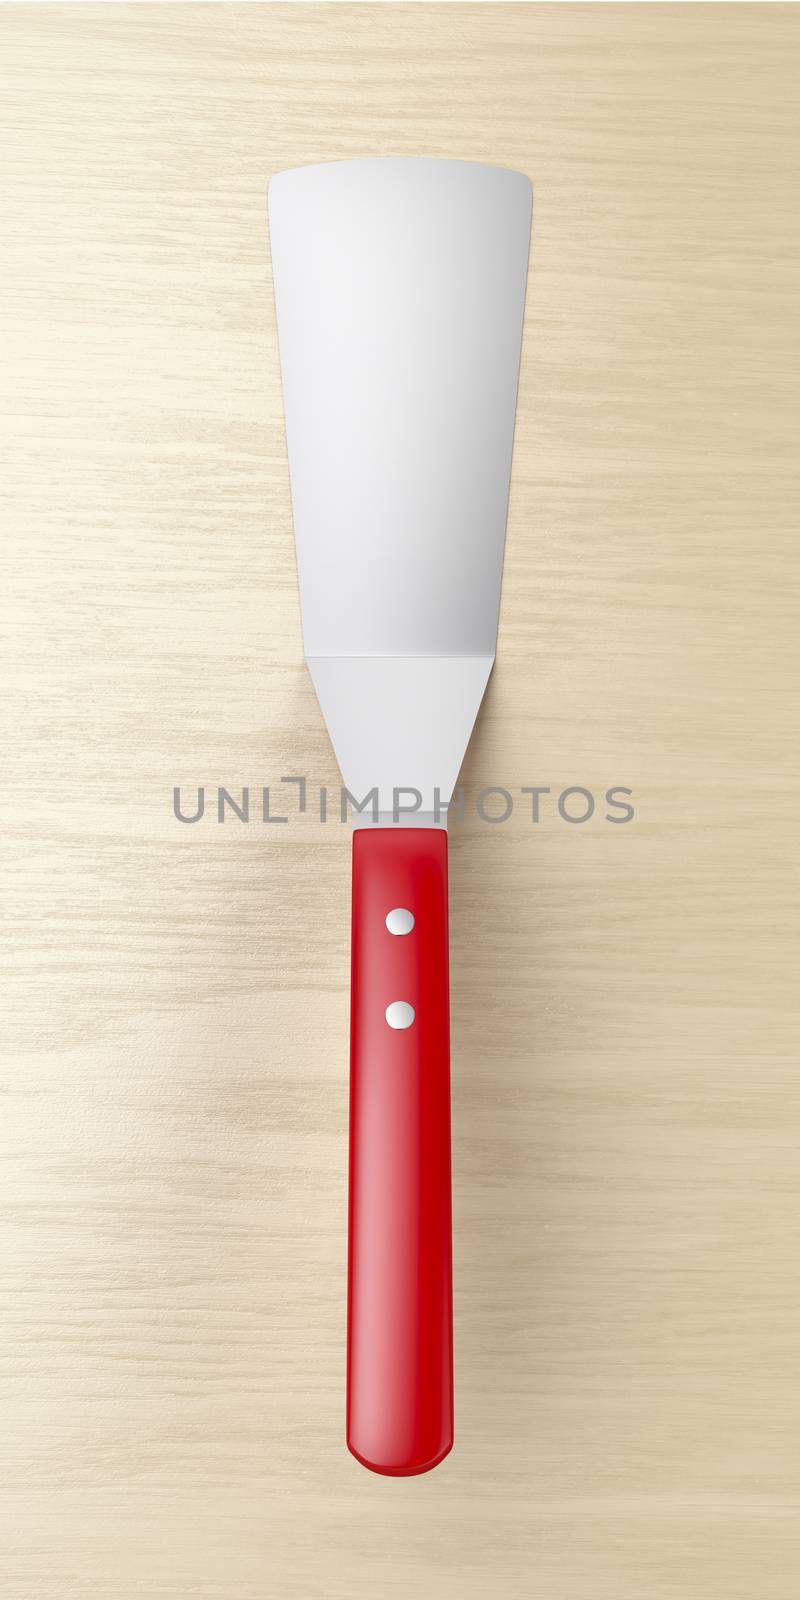 Spatula on the table by magraphics